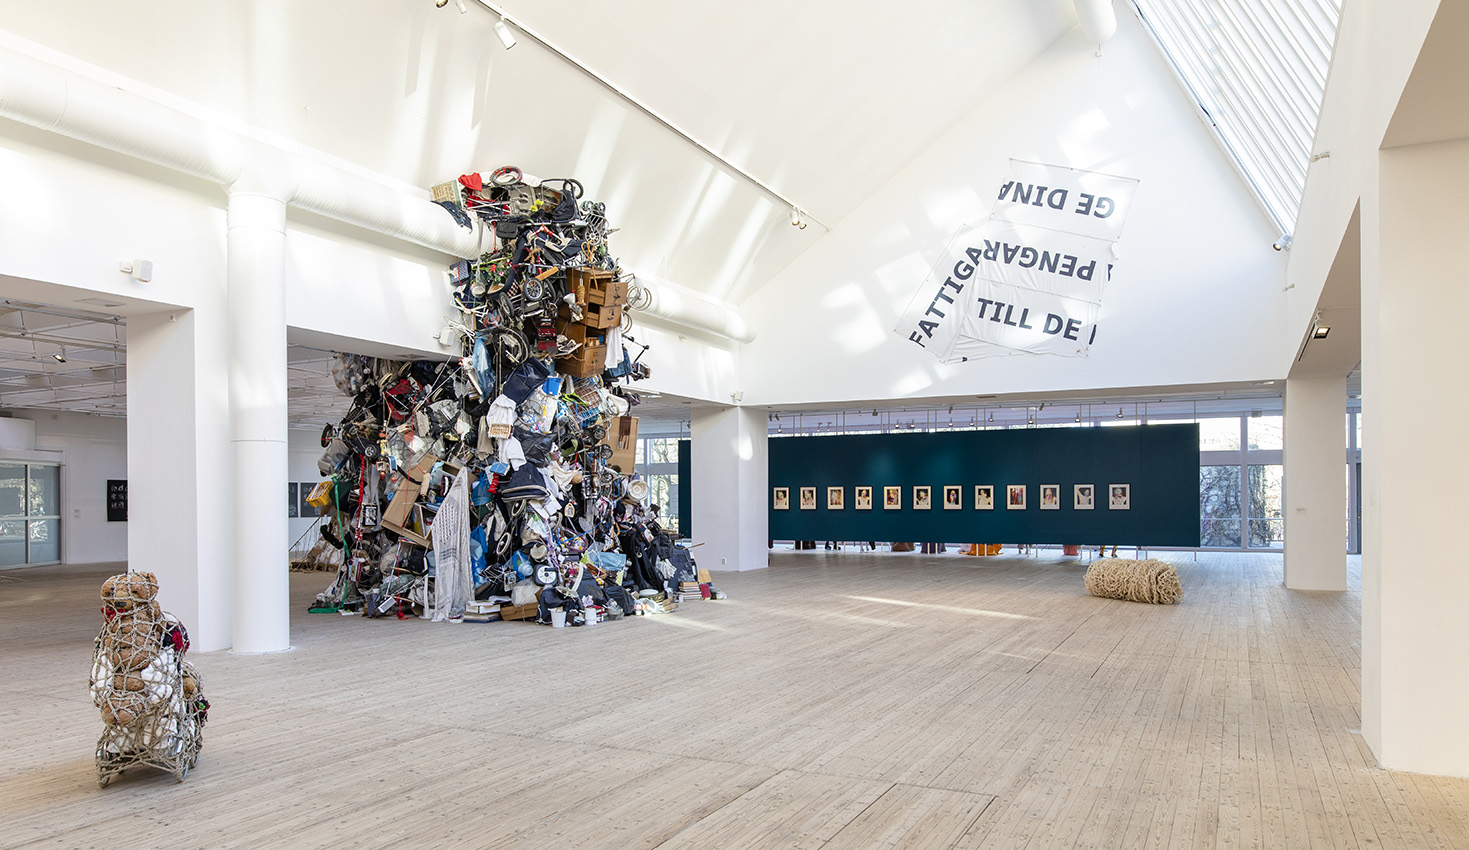 Overview of the exhibition hall. In focus, a piece resembling a large pile of debris constructed from belongings from several homes, such as beds and baby carriages. The pile is approximately five by seven meters in circumference.